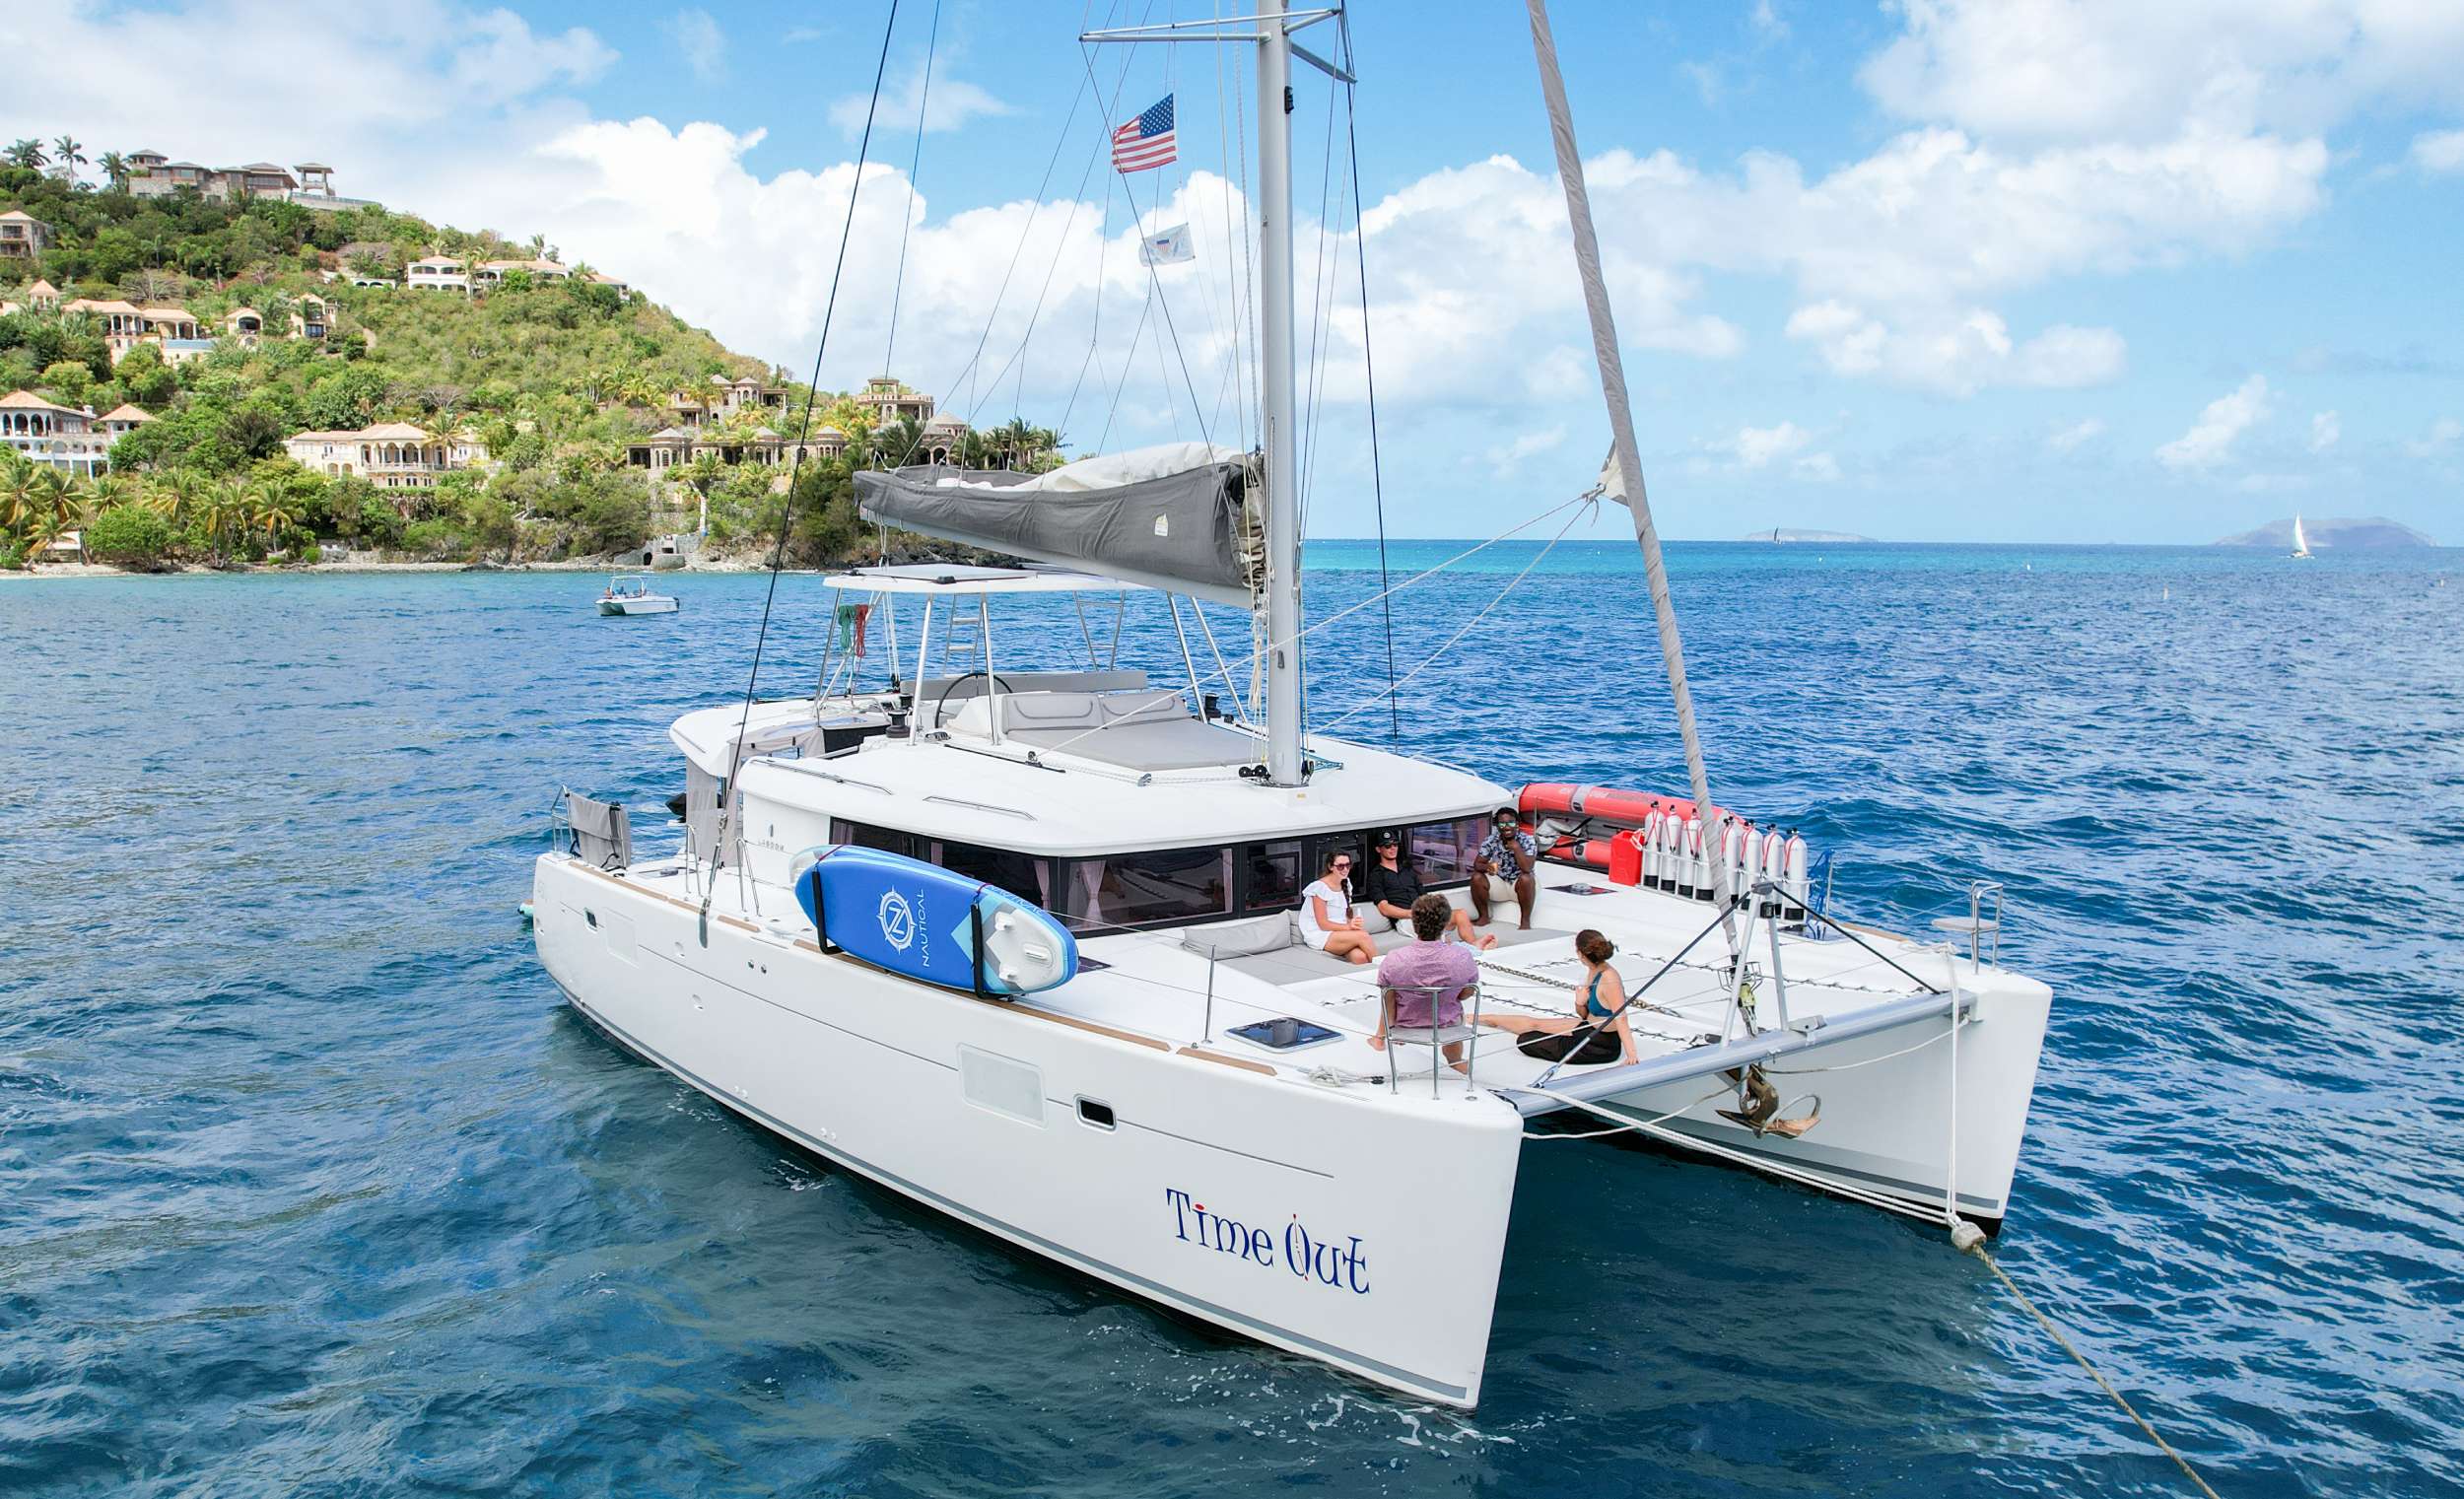 Time Out is a great option for families and groups of friends looking for a chance to disconnect from the rat race and re-connect with each other. A 2017 Lagoon 450F, Time out is outfitted to sleep up to 6 guests comfortably in 3 staterooms, each with ensuite heads. Meals are typically taken al fresco in the yacht&rsquo;s roomy cockpit, and guests can enjoy a variety of lounging areas throughout. The flybridge boasts 360&ordm; views, perfect for taking in the sights while sailing or at anchor with a cocktail in hand. The yacht has been outfitted for entertaining, with water toys, elegant amenities and a crew to bring it all together. Whether checking out new dive spots or curling up in the forward cockpit with a good book, this is your indication that you need some TIME OUT!